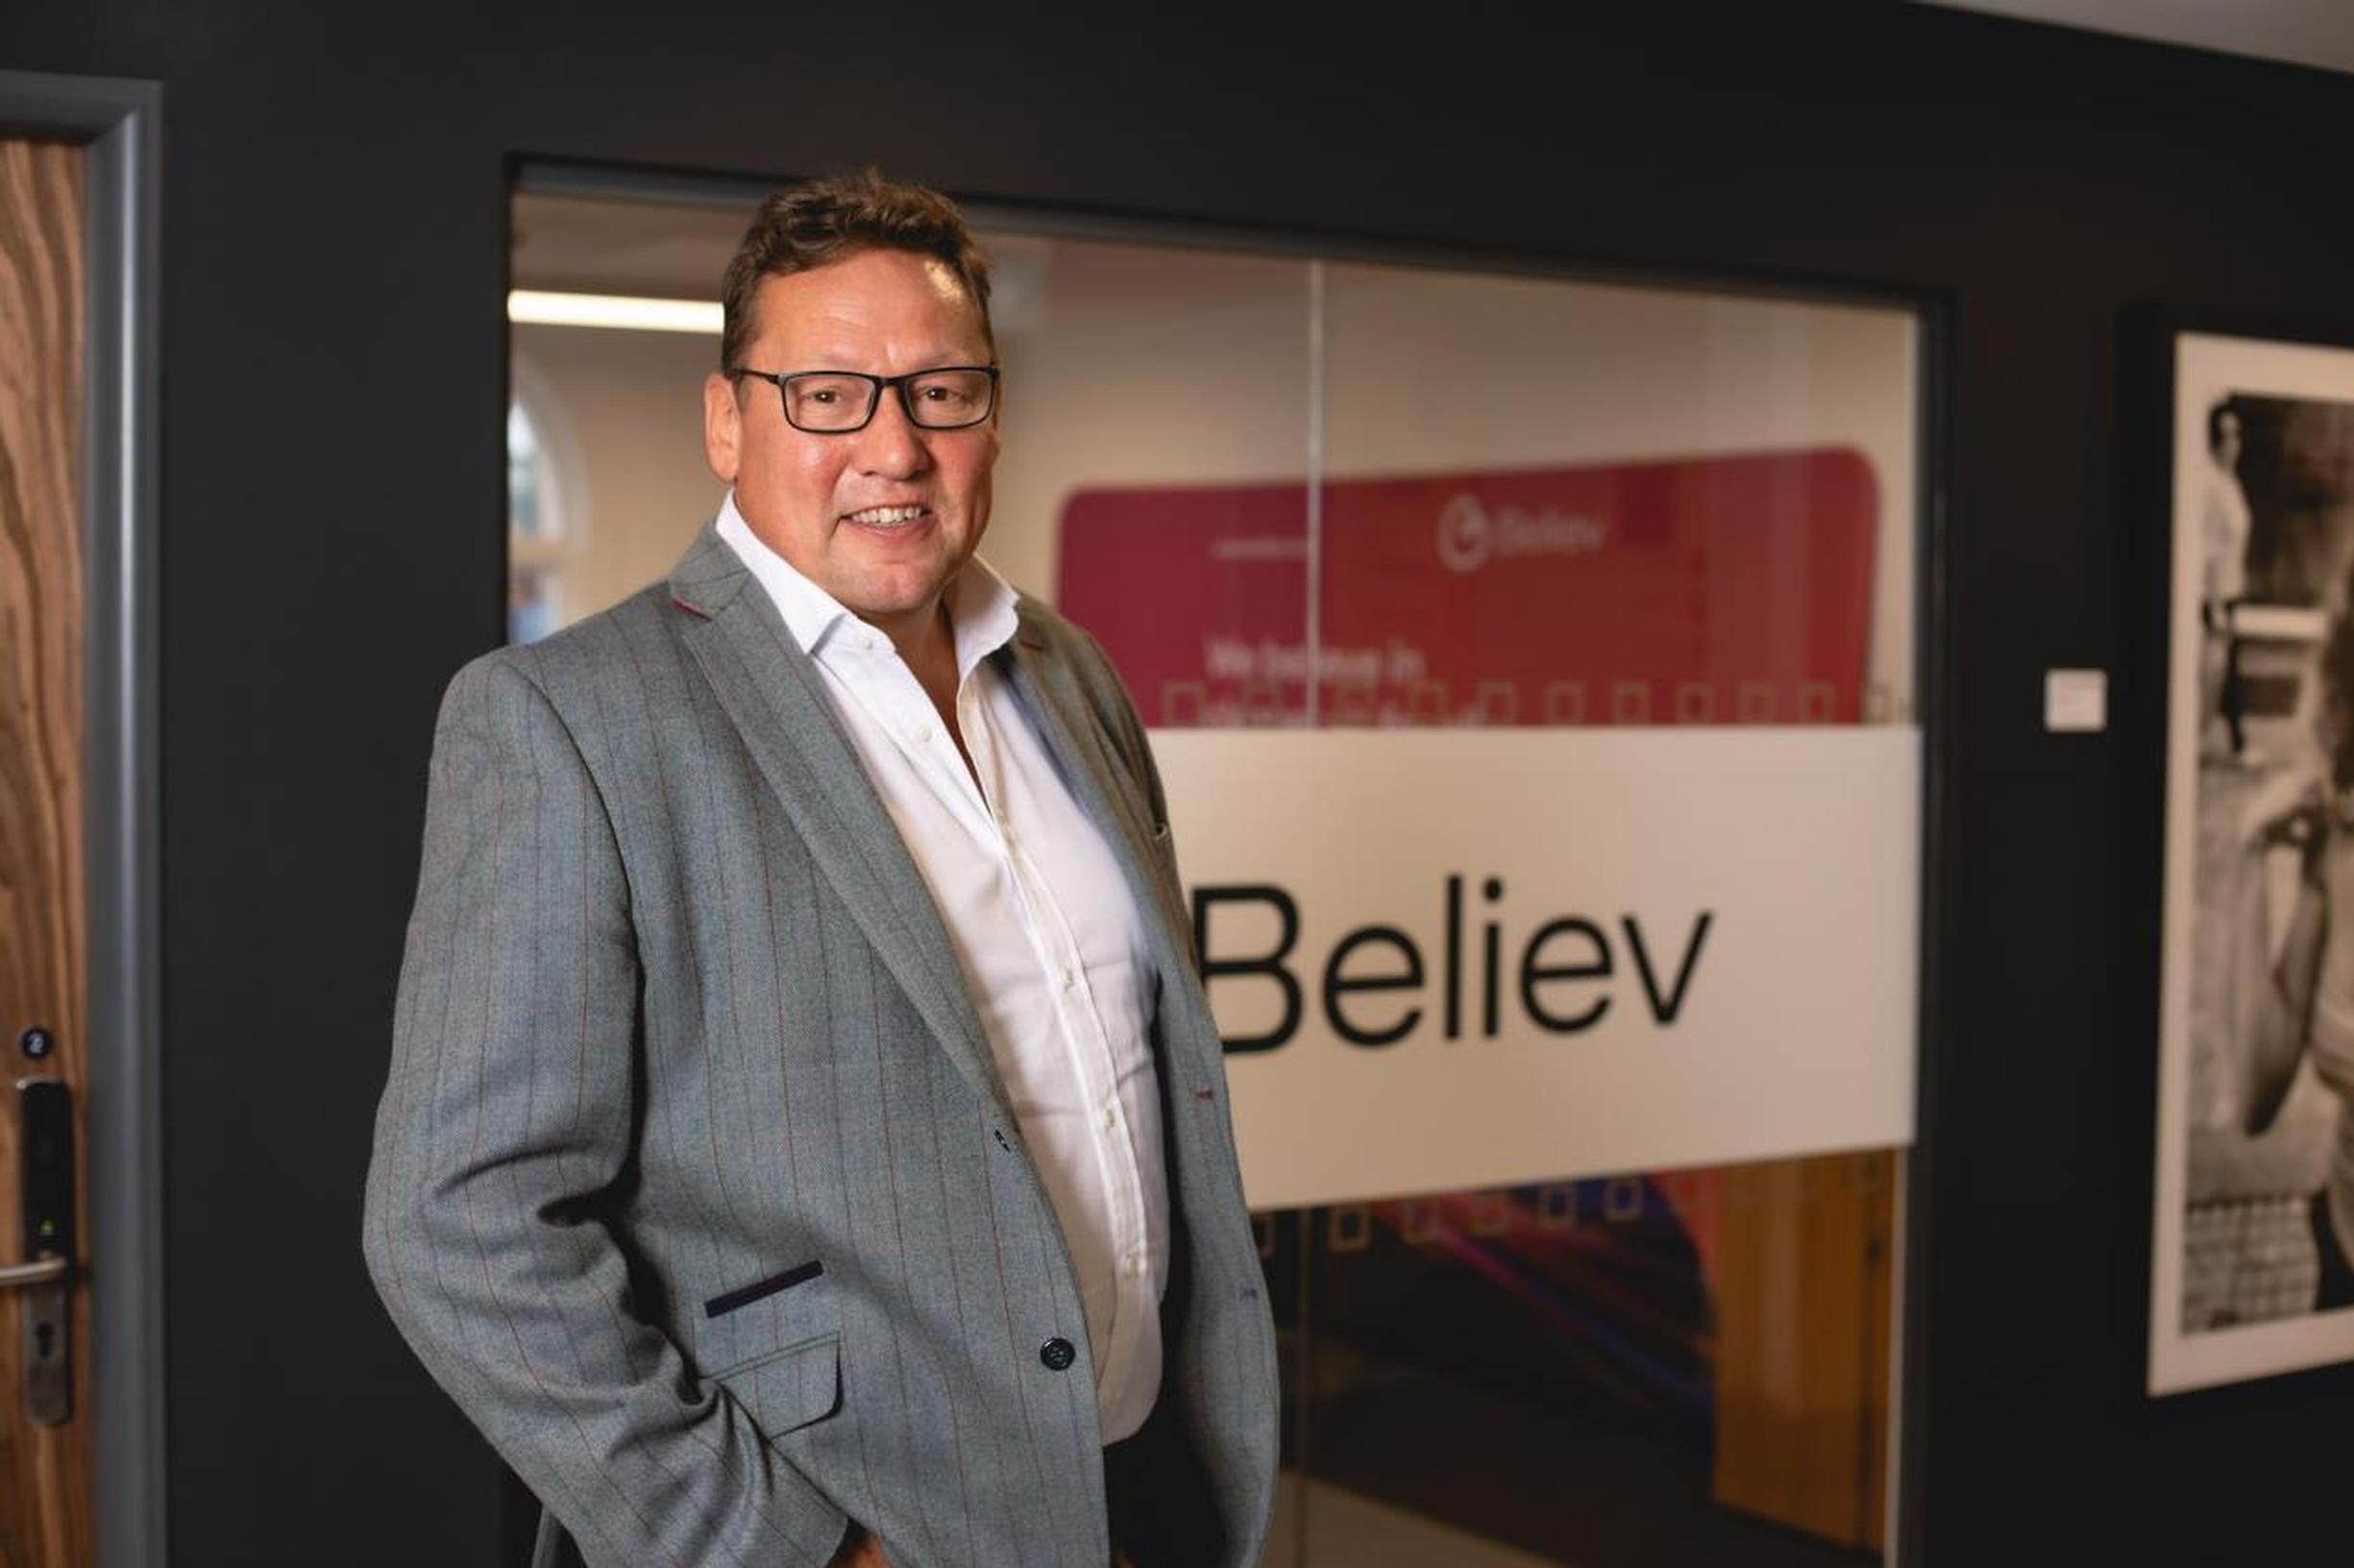 Believ chargepoint network opens Leeds Office